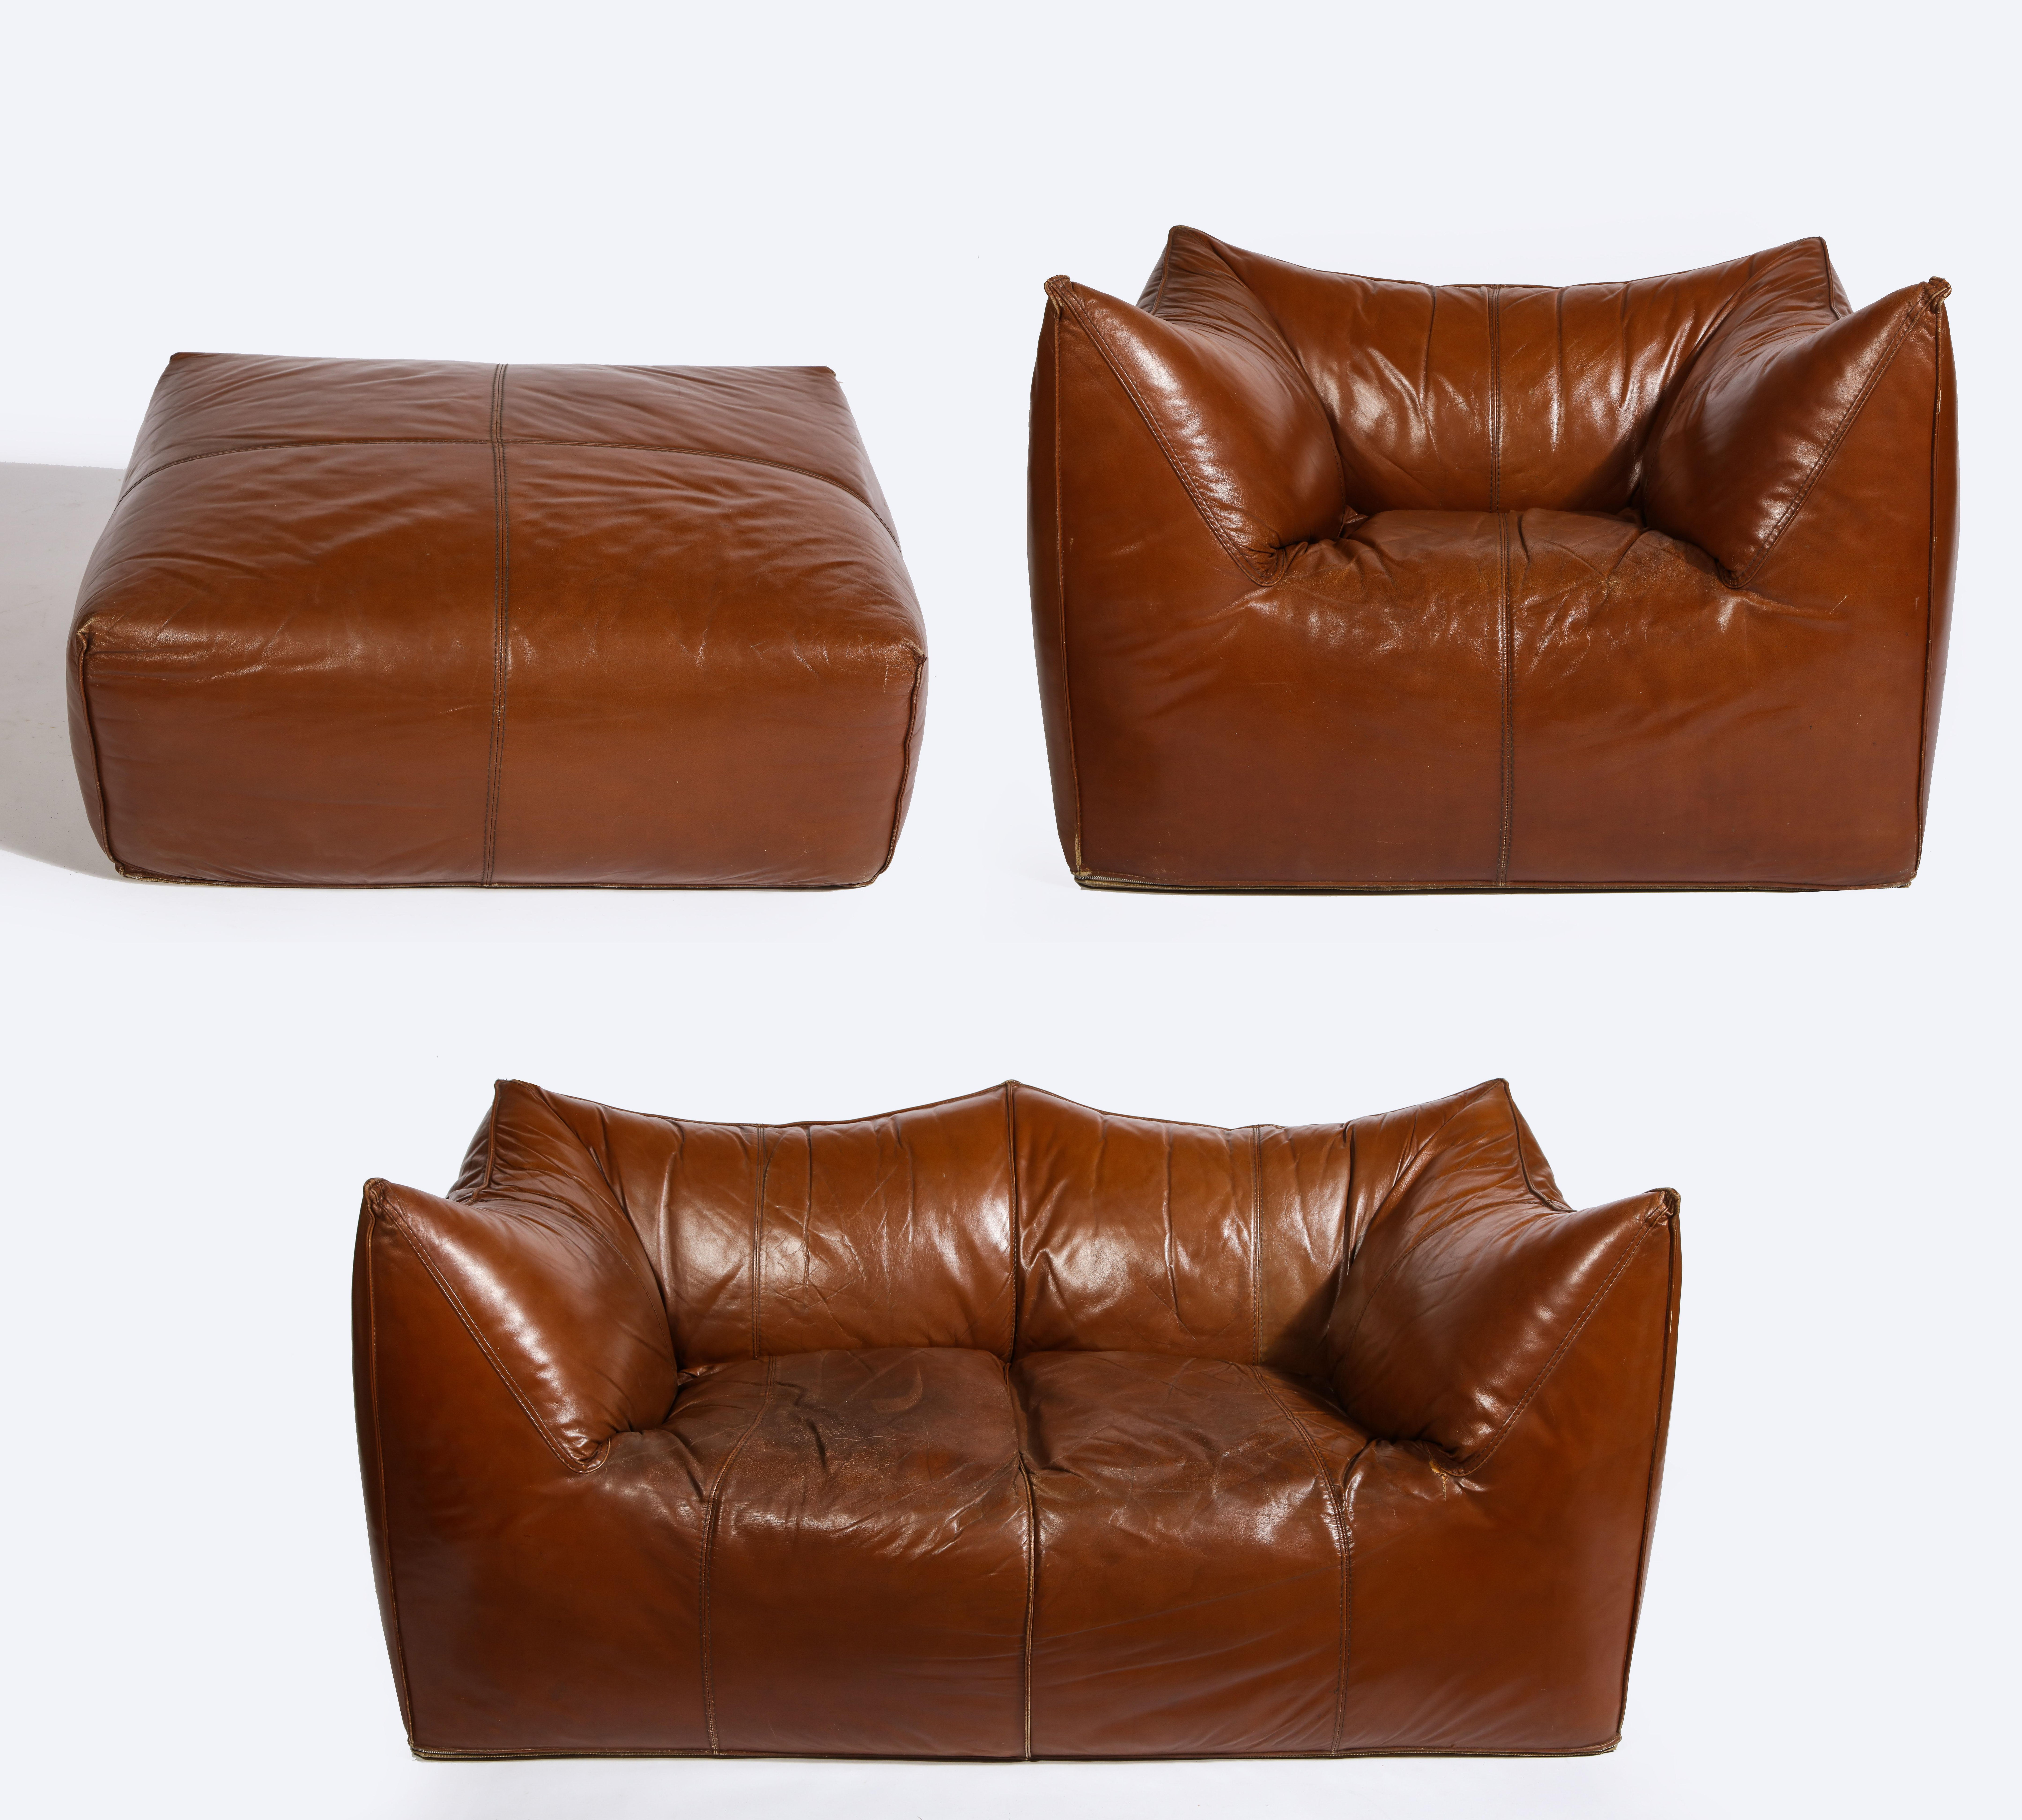 Mario Bellini Cognac brown leather sofa

Sofa set, beautiful deep cognac color. Beautiful vintage condition, Italy, 1970s.

Measures: Sofa
30 inches high
63 inches wide
31 inches deep
15 inches seat height.